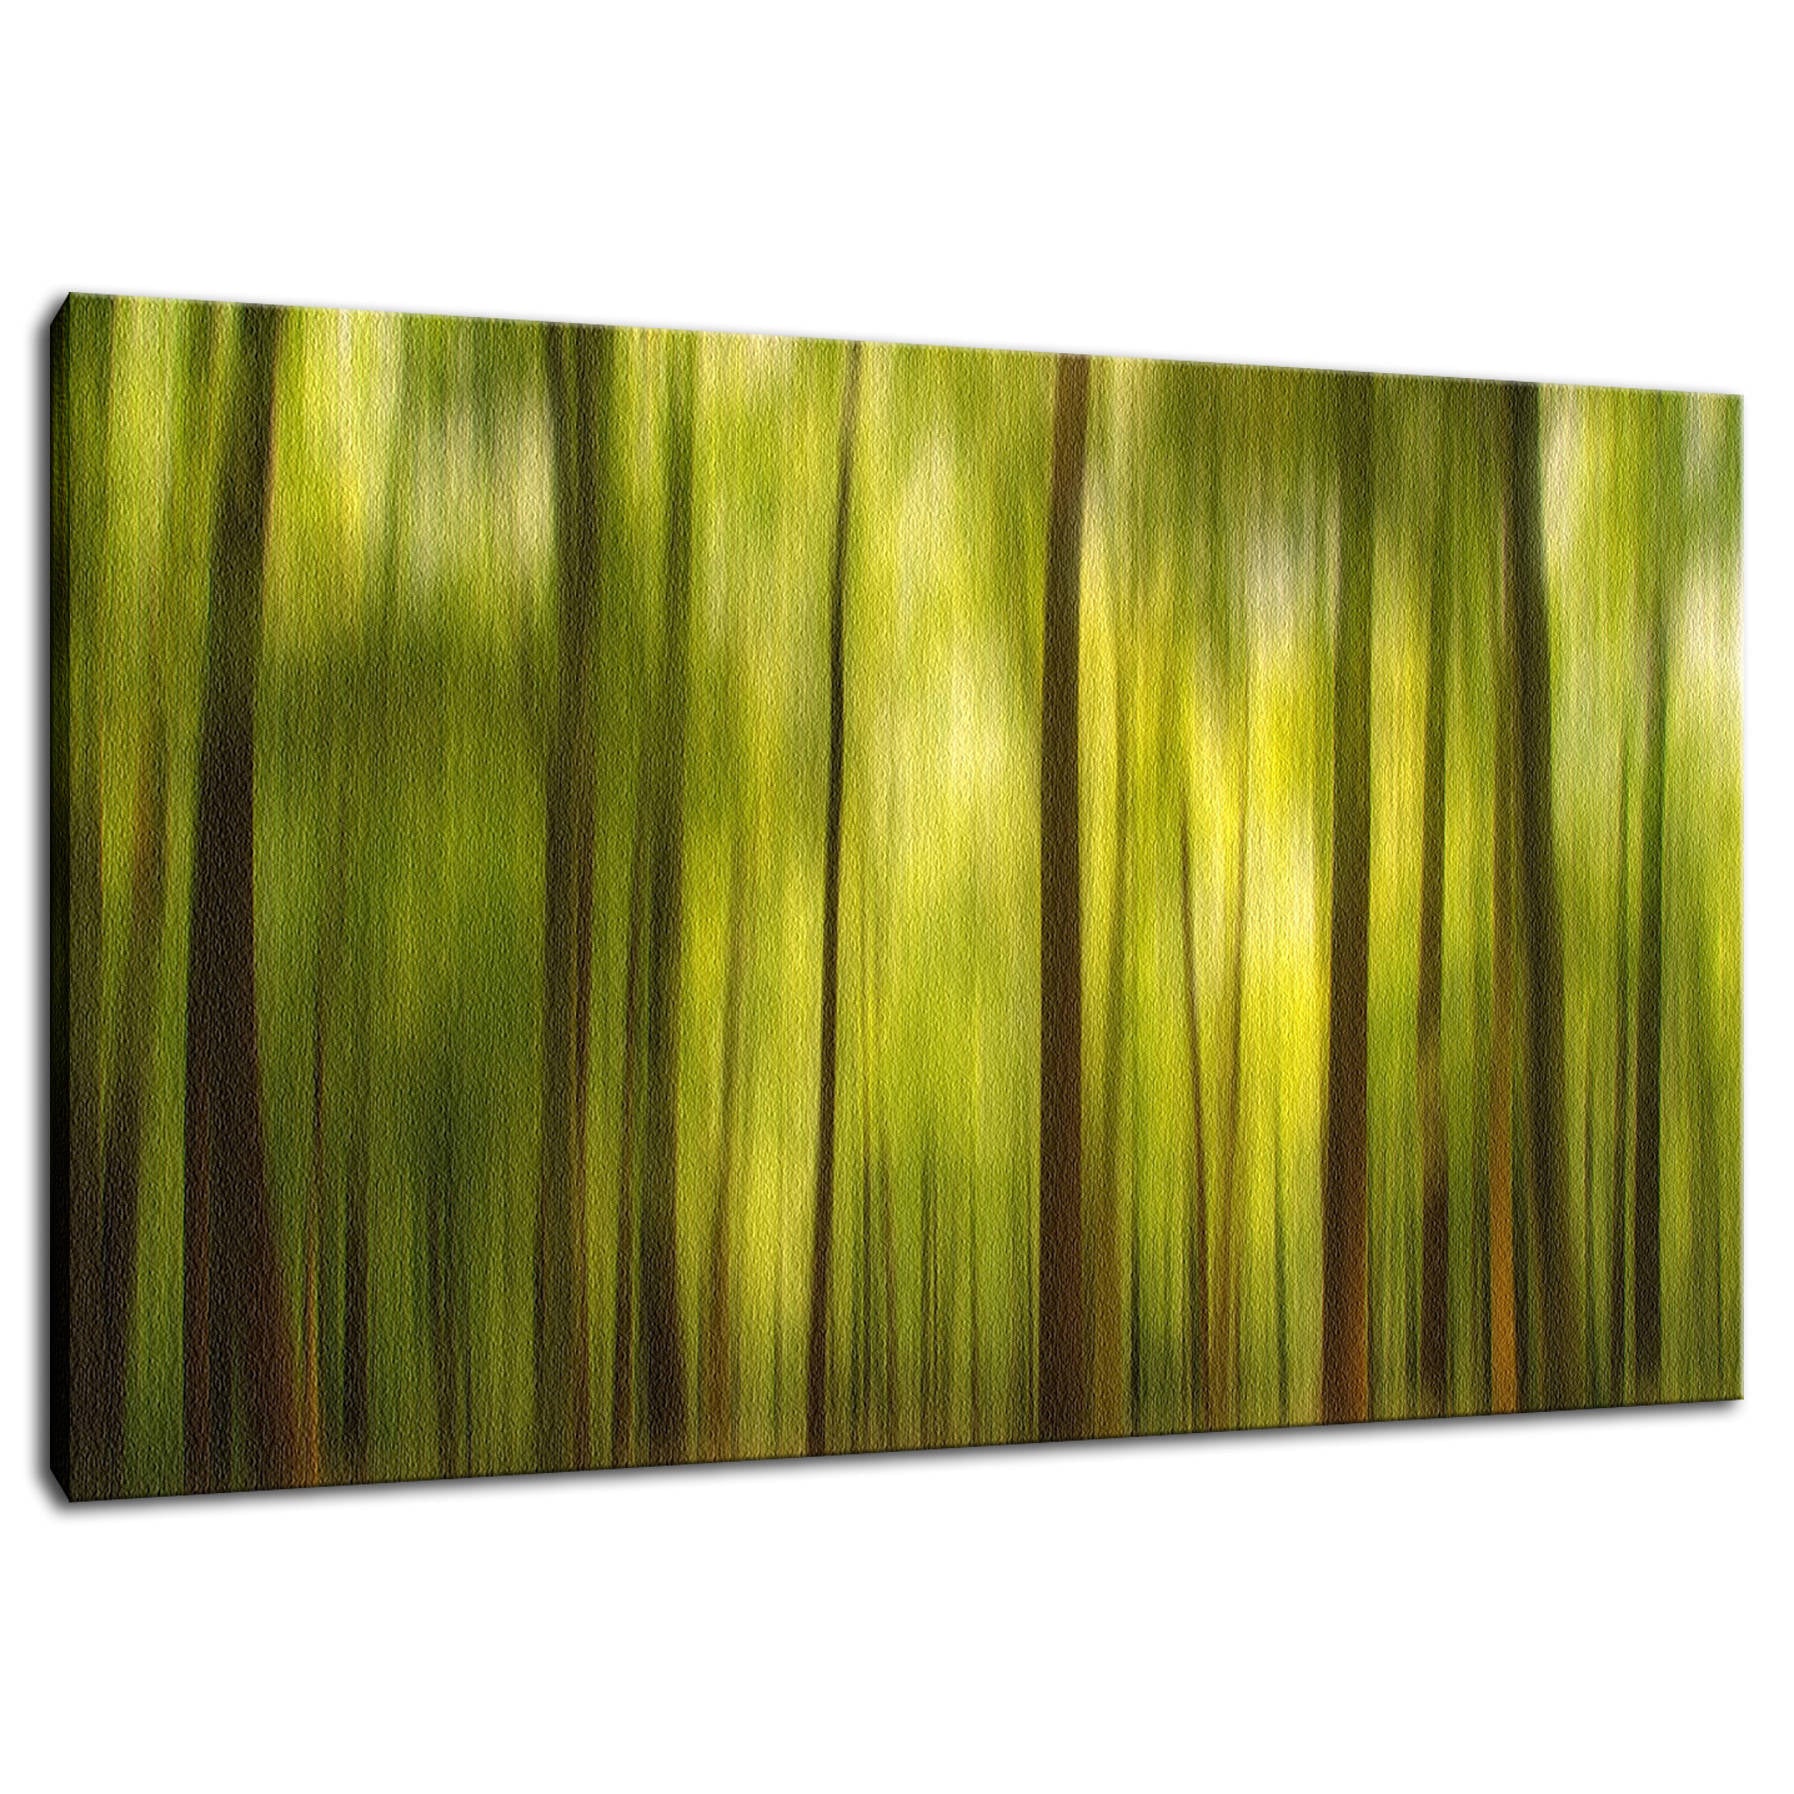 Warmth of the Forests Colors Rural Landscape Fine Art Canvas Wall Art Prints  - PIPAFINEART